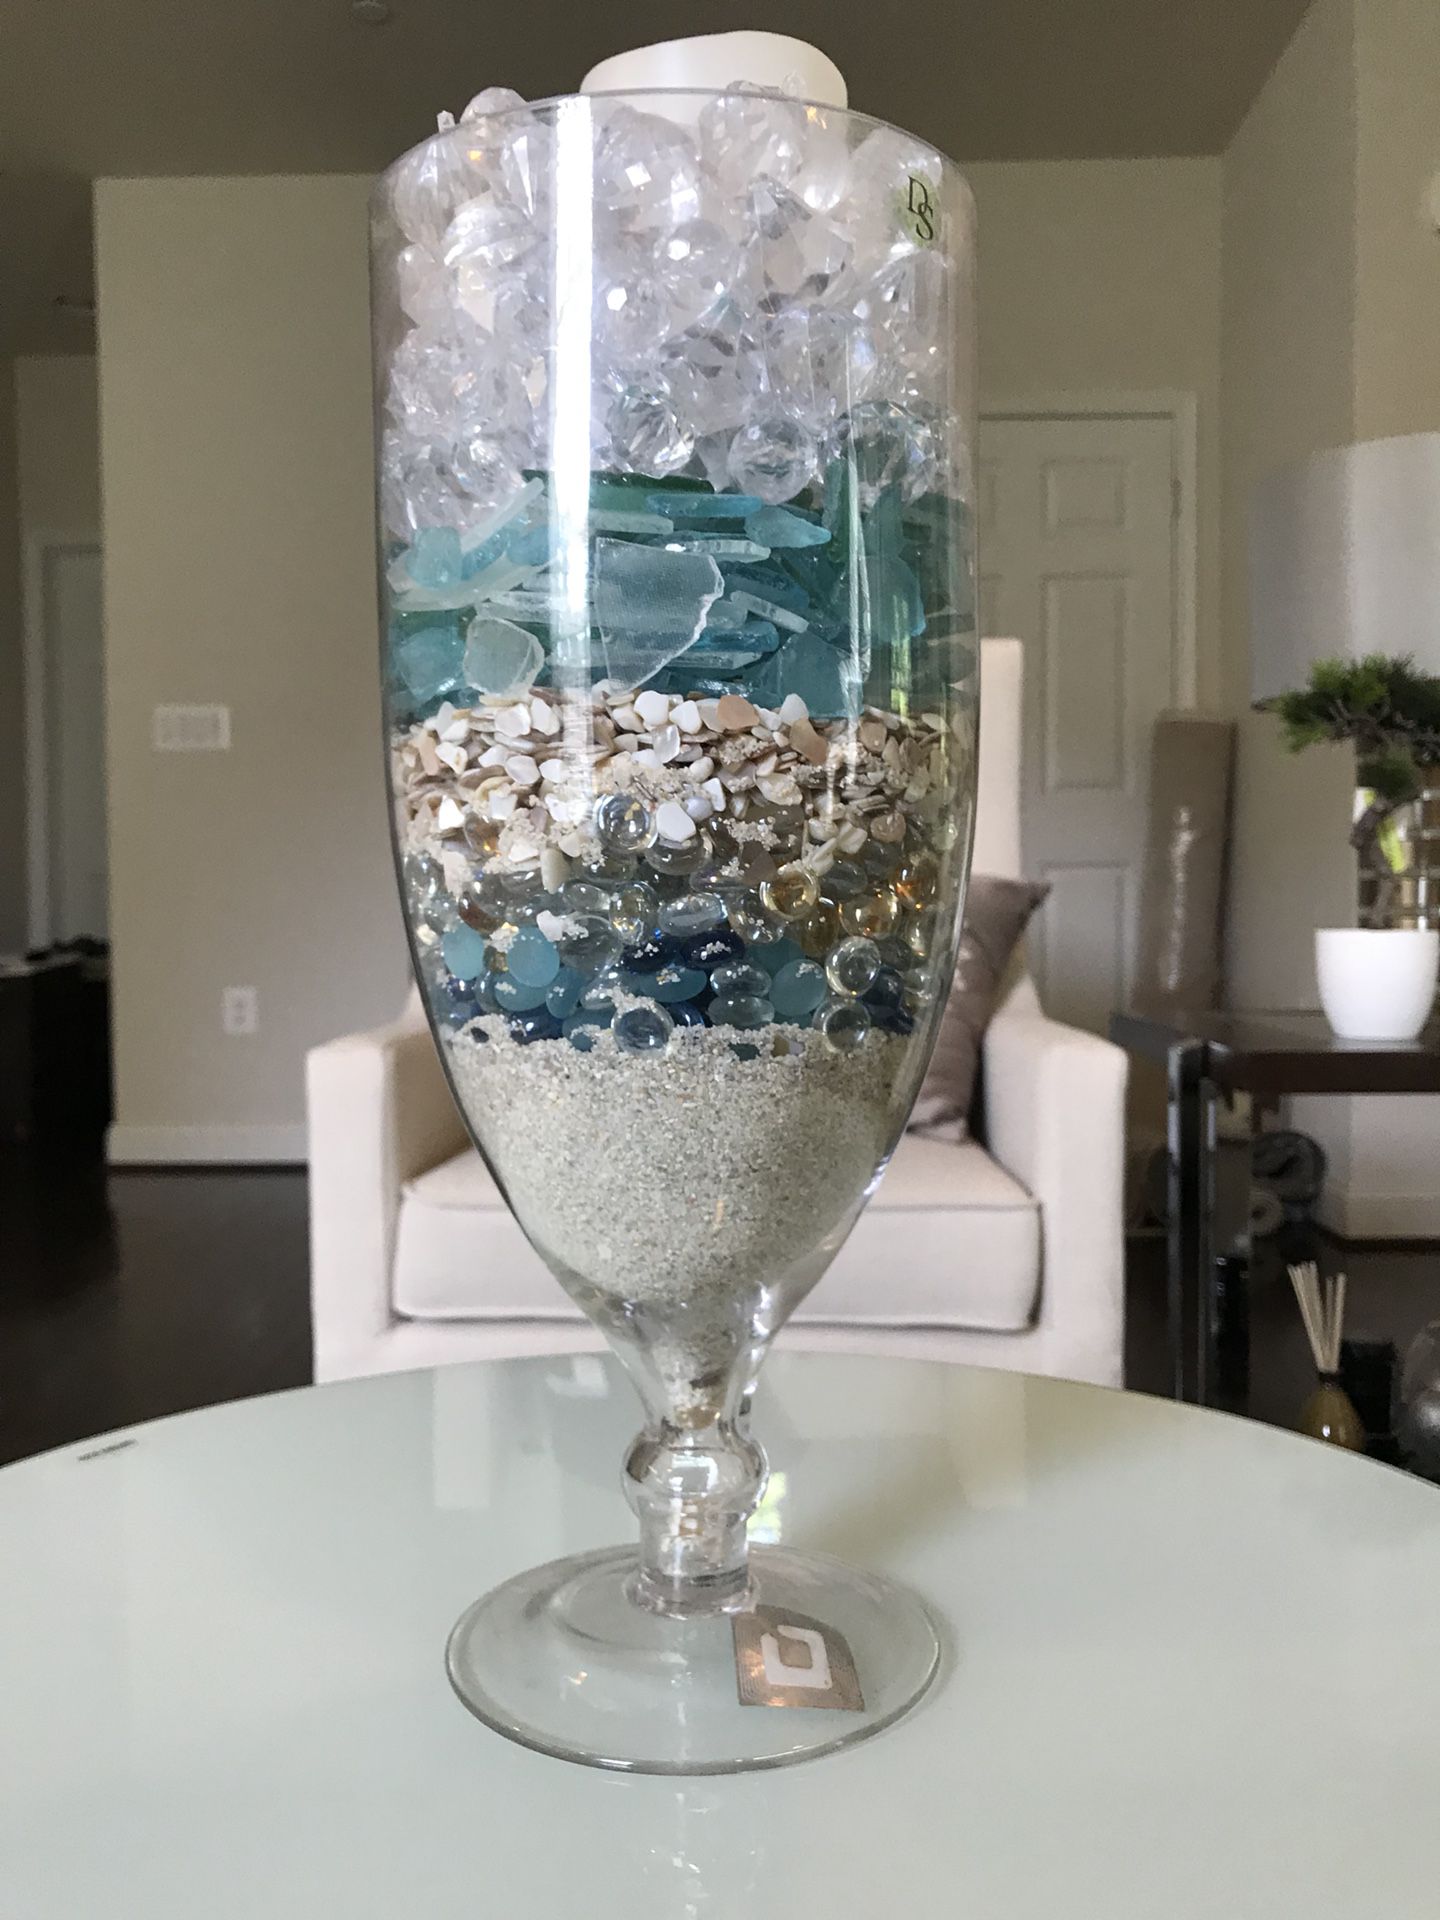 Vase with ornaments inside